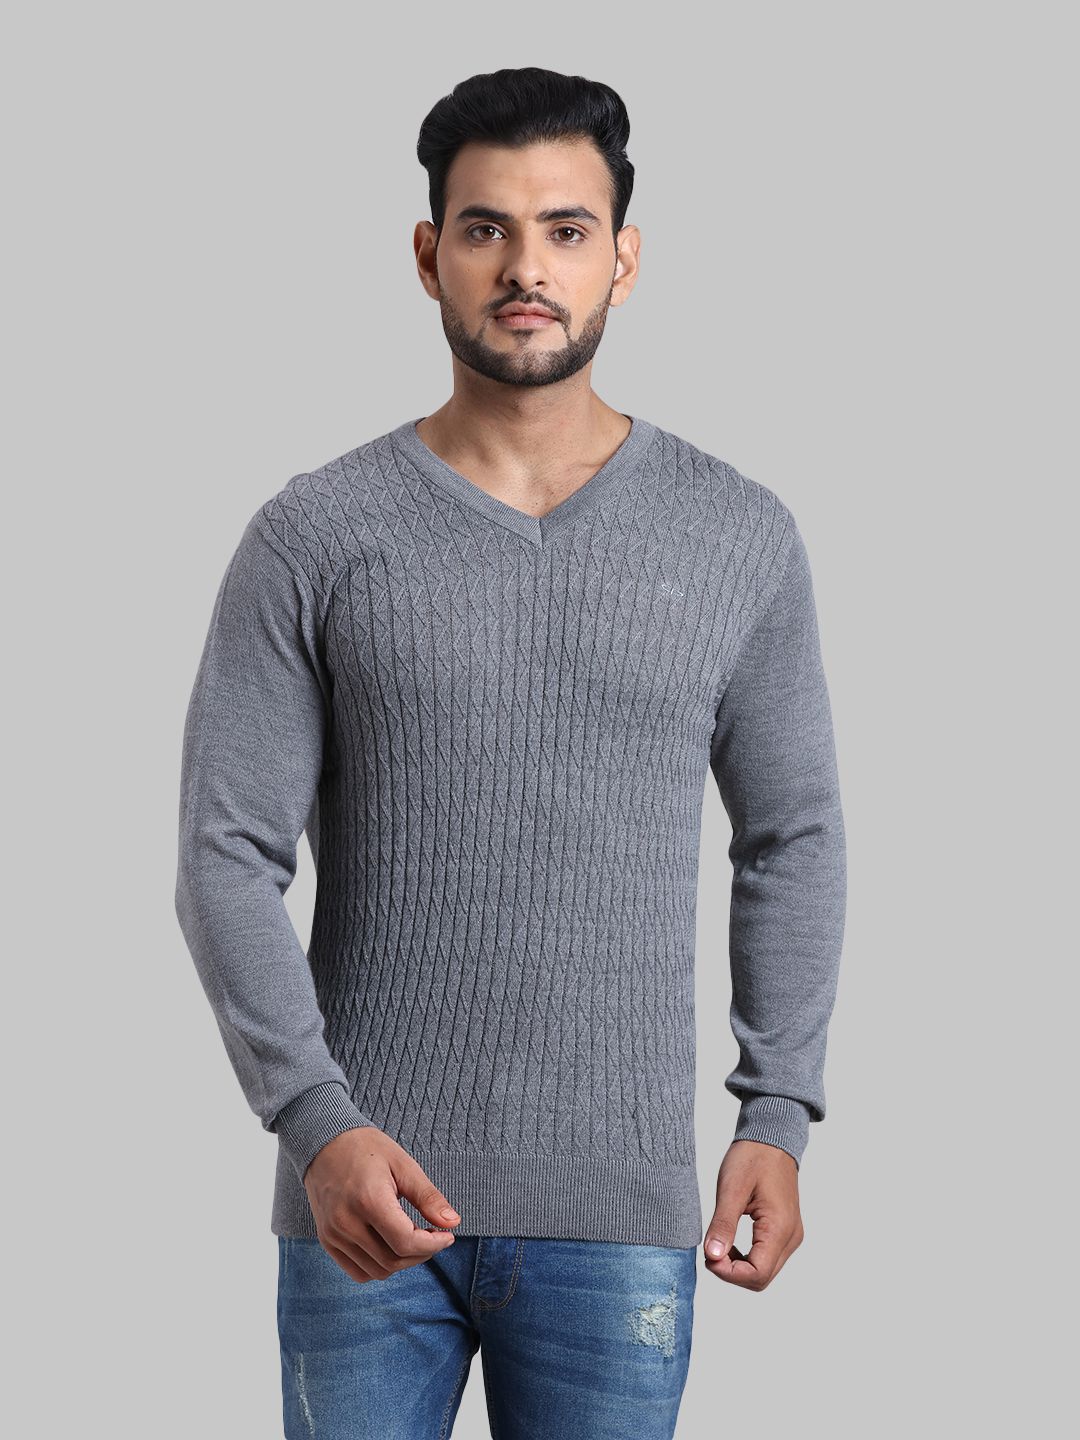     			Colorplus Acrylic V-Neck Men's Full Sleeves Pullover Sweater - Grey ( Pack of 1 )